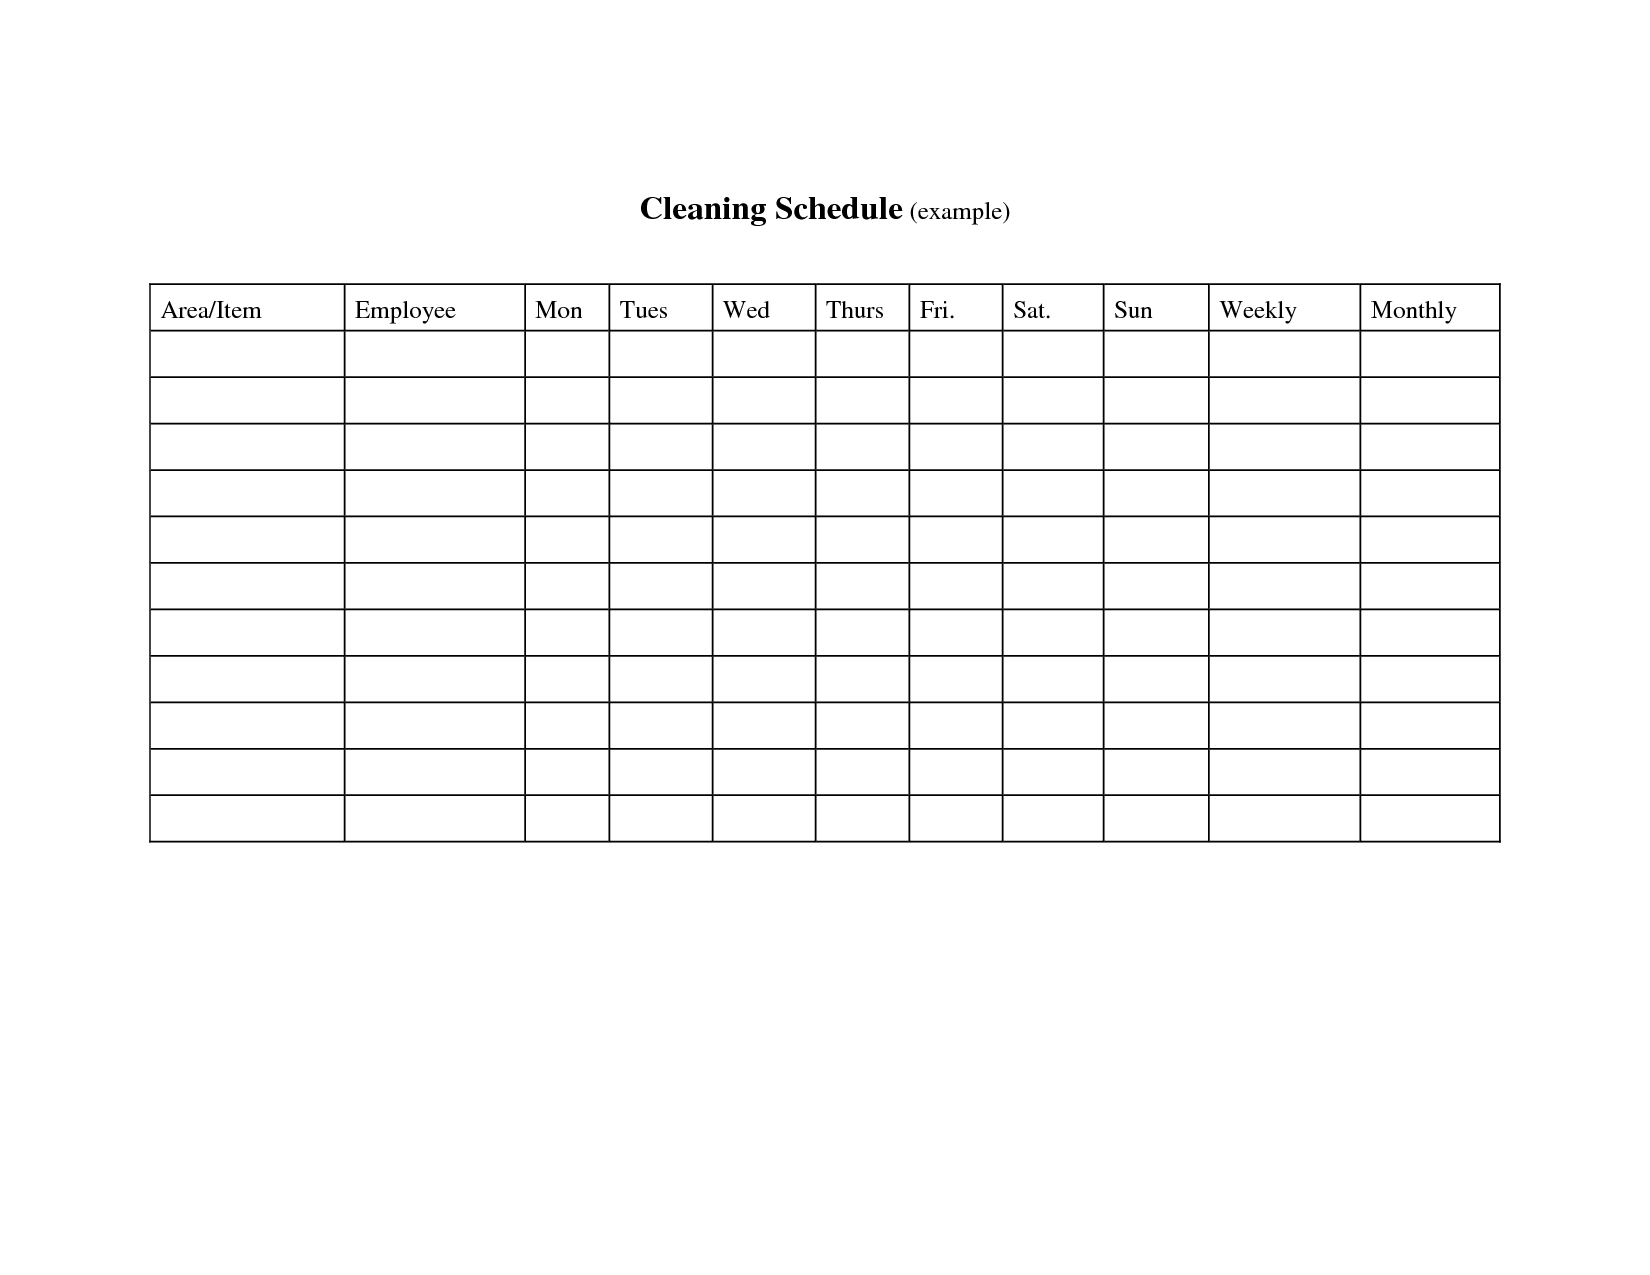 Cleaning Schedule Log Template Image